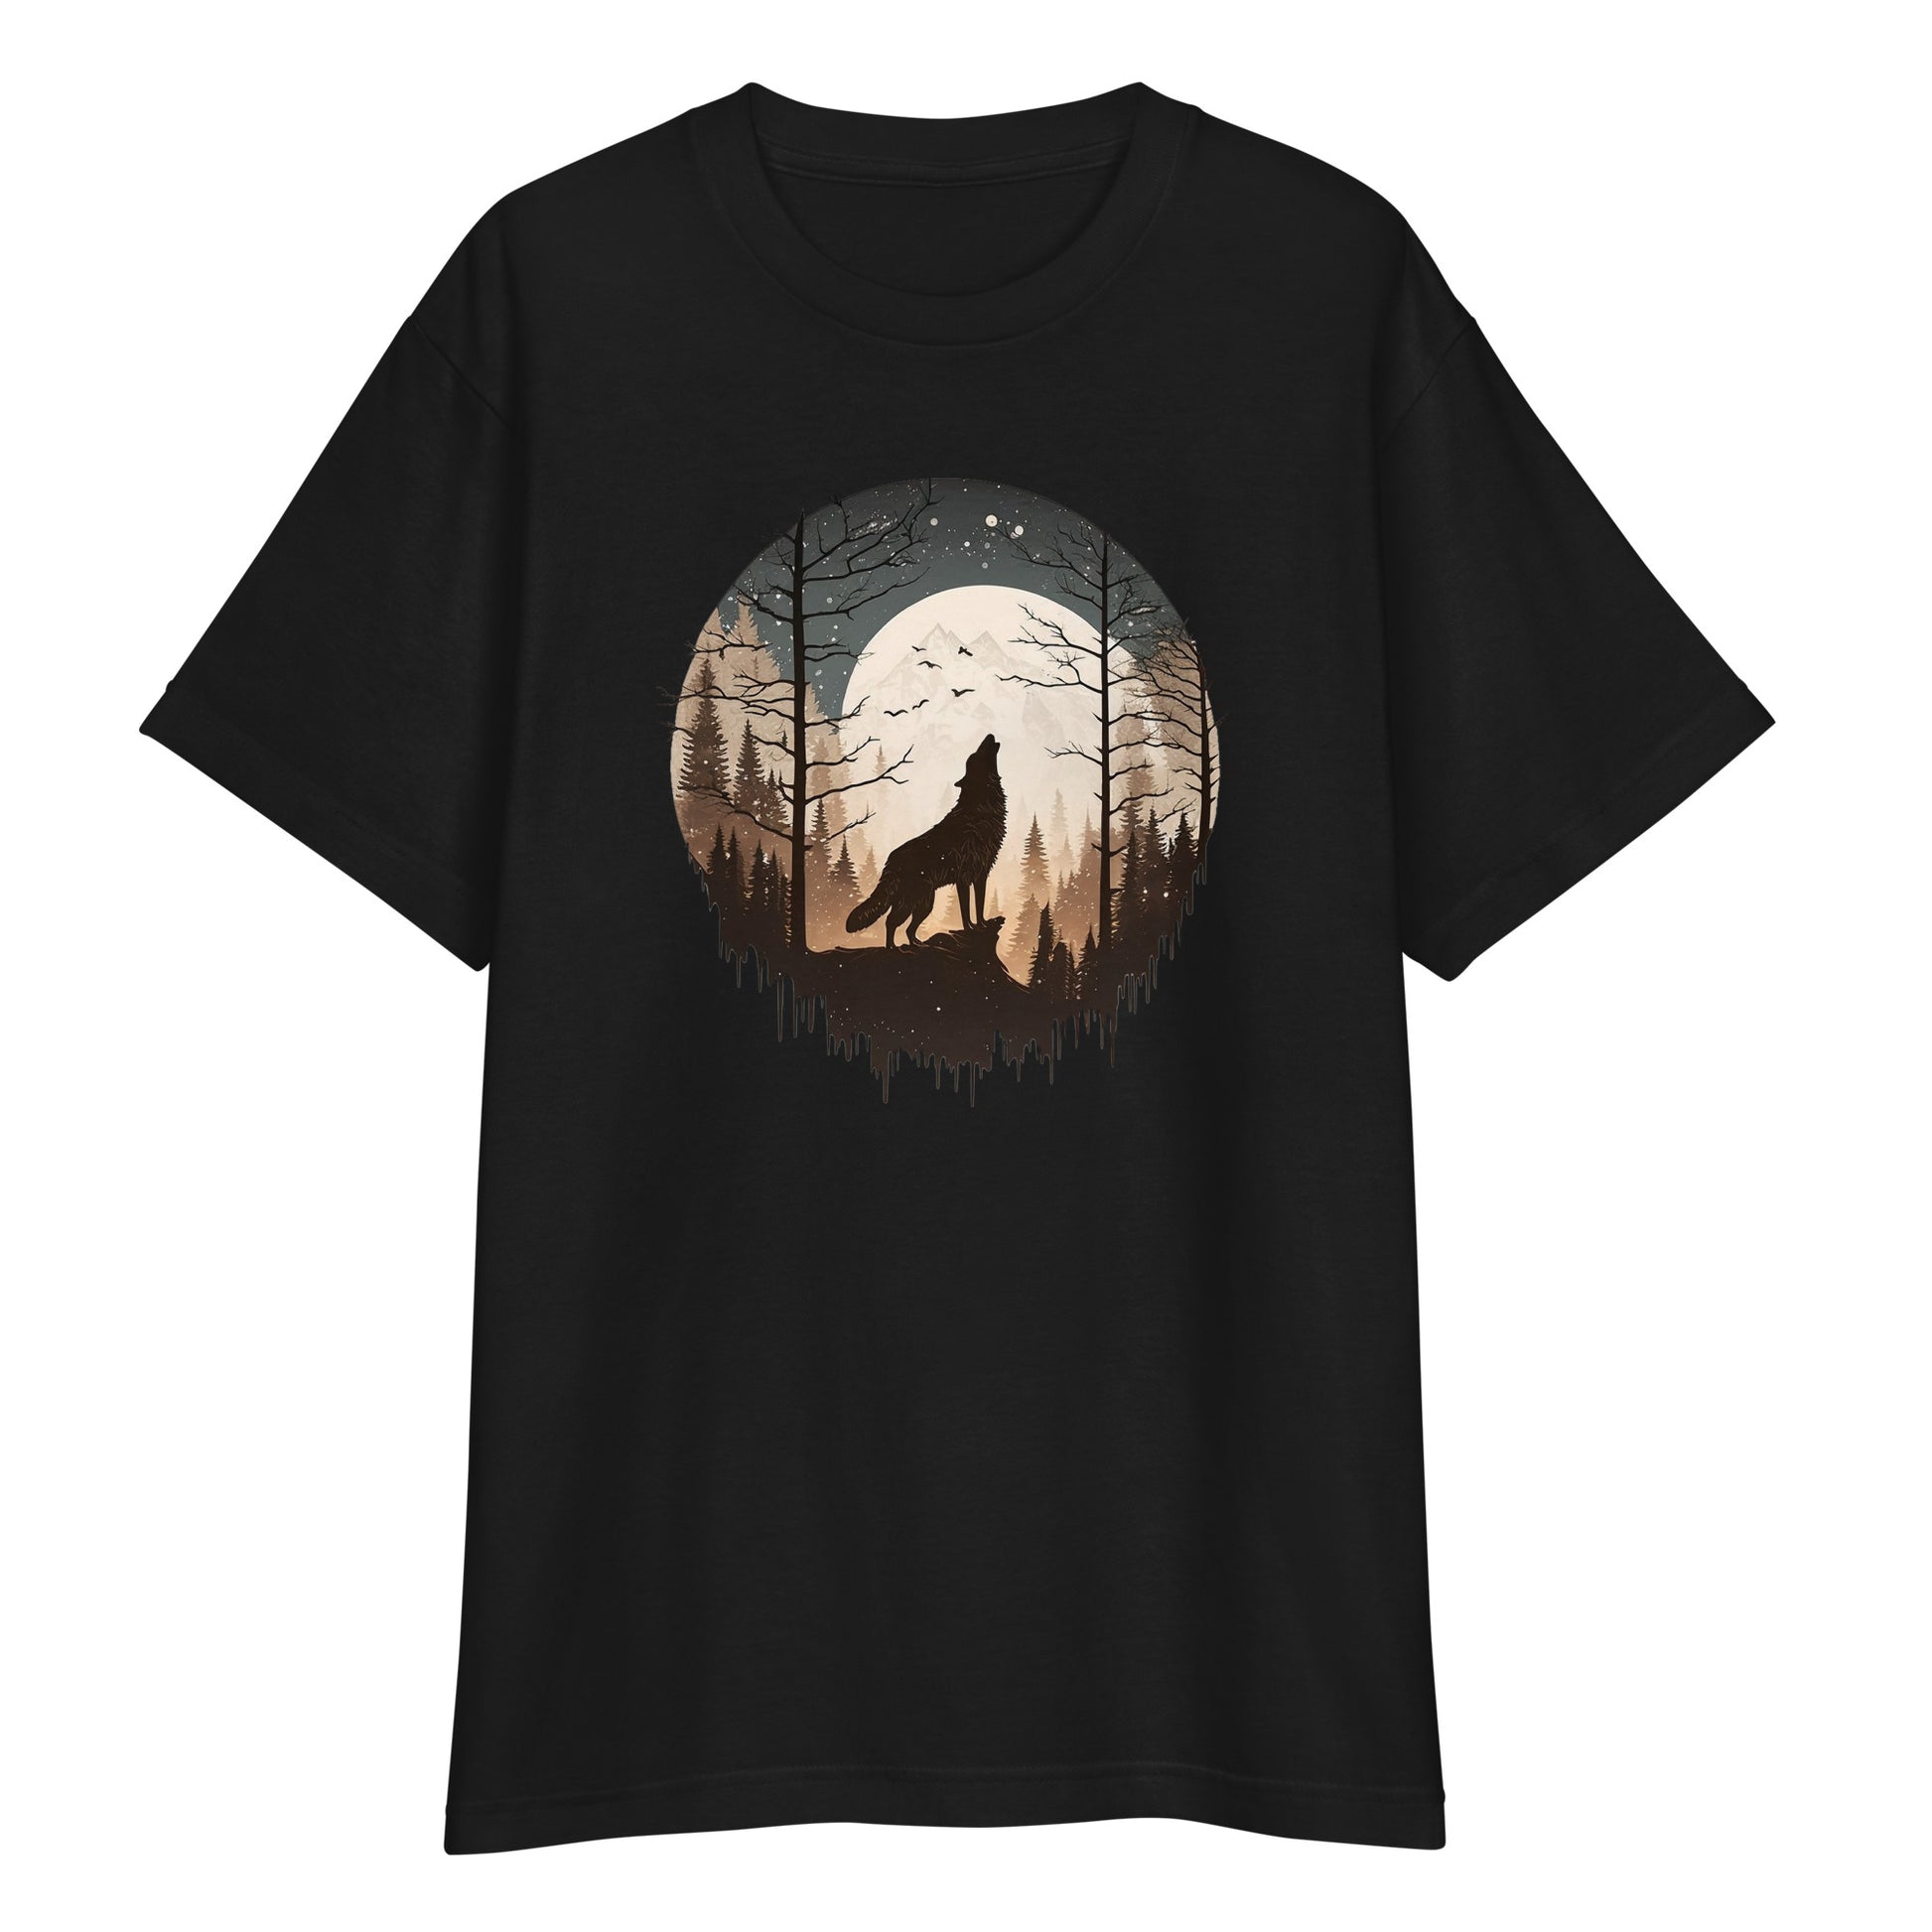 Black High Quality Tee - Front Design with a Howling Wolf